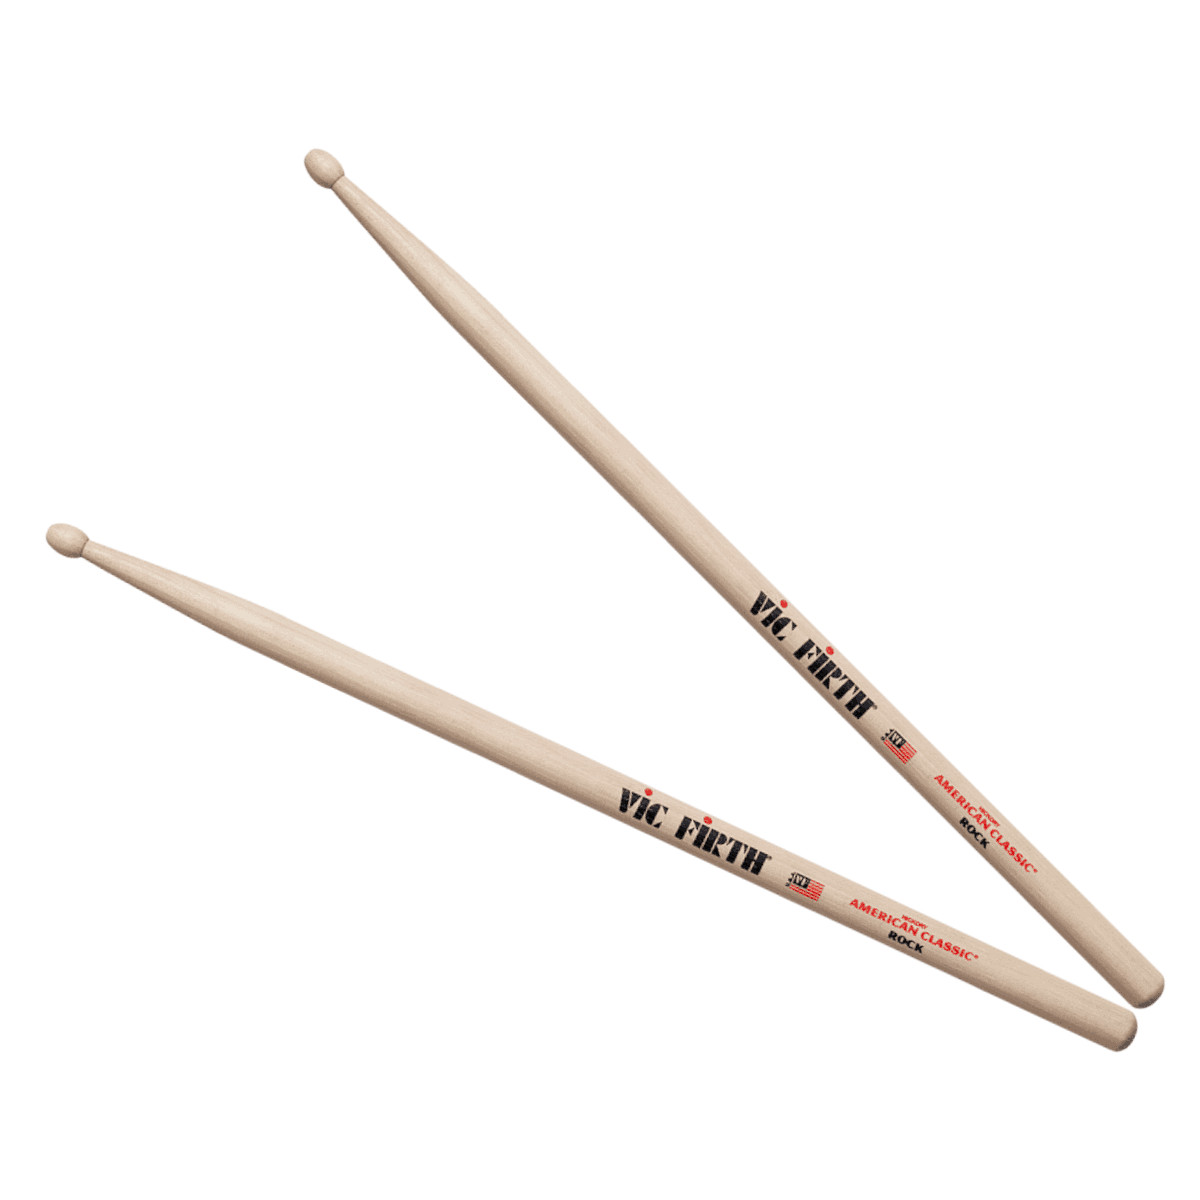 VIC FIRTH AMERICAN CLASSIC HICKORY - ROCK